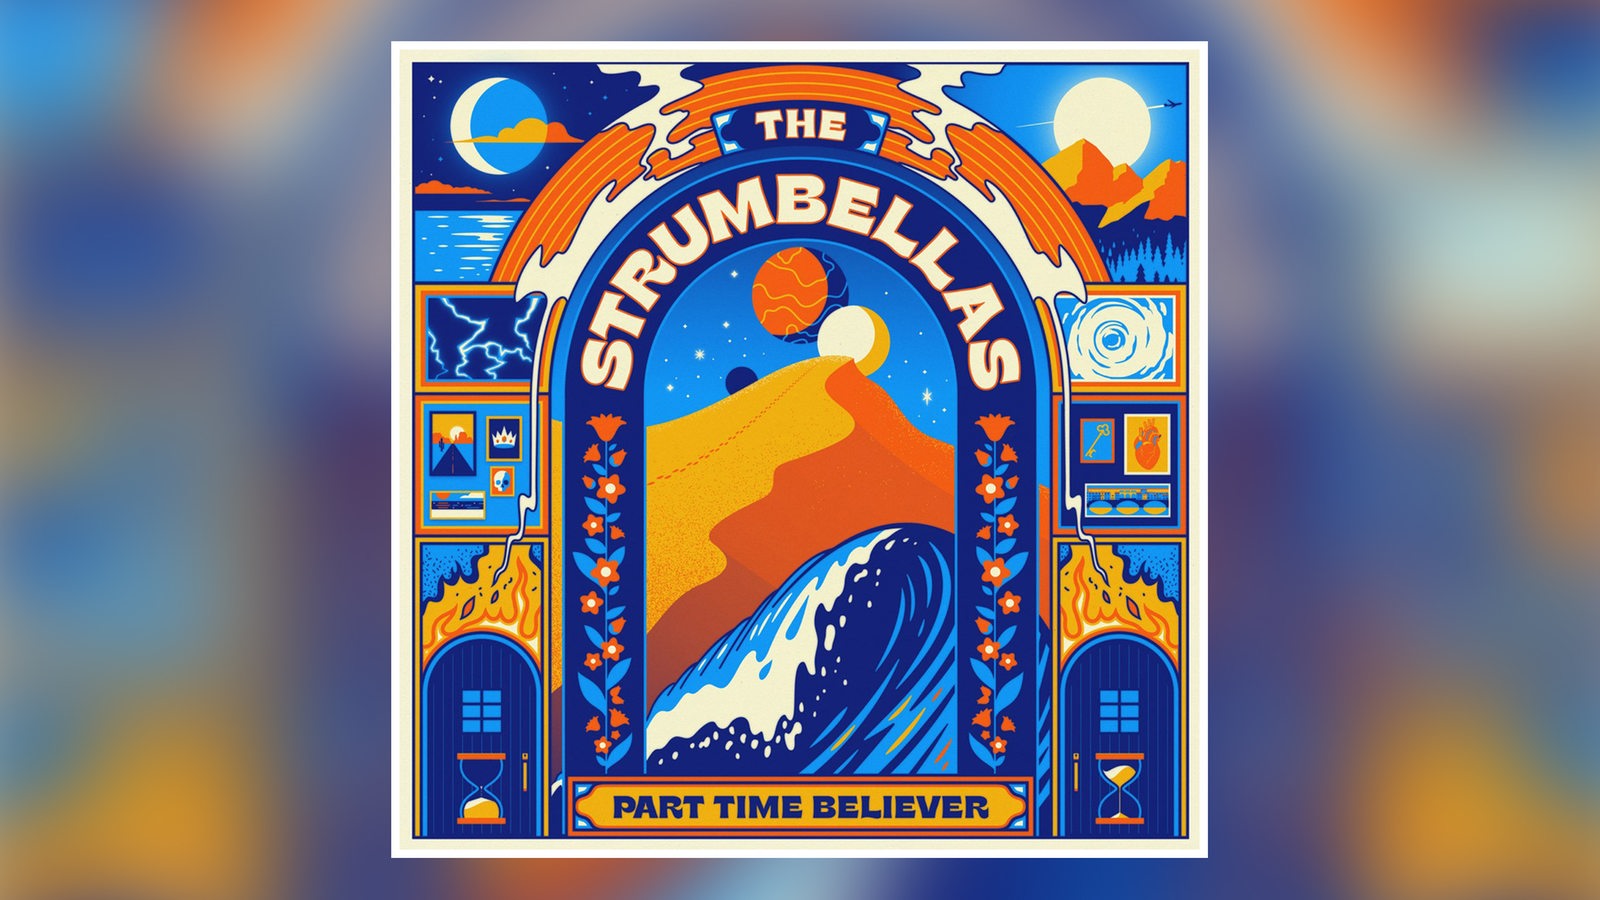 Albumcover: The Strumbellas "Part Time Believer"